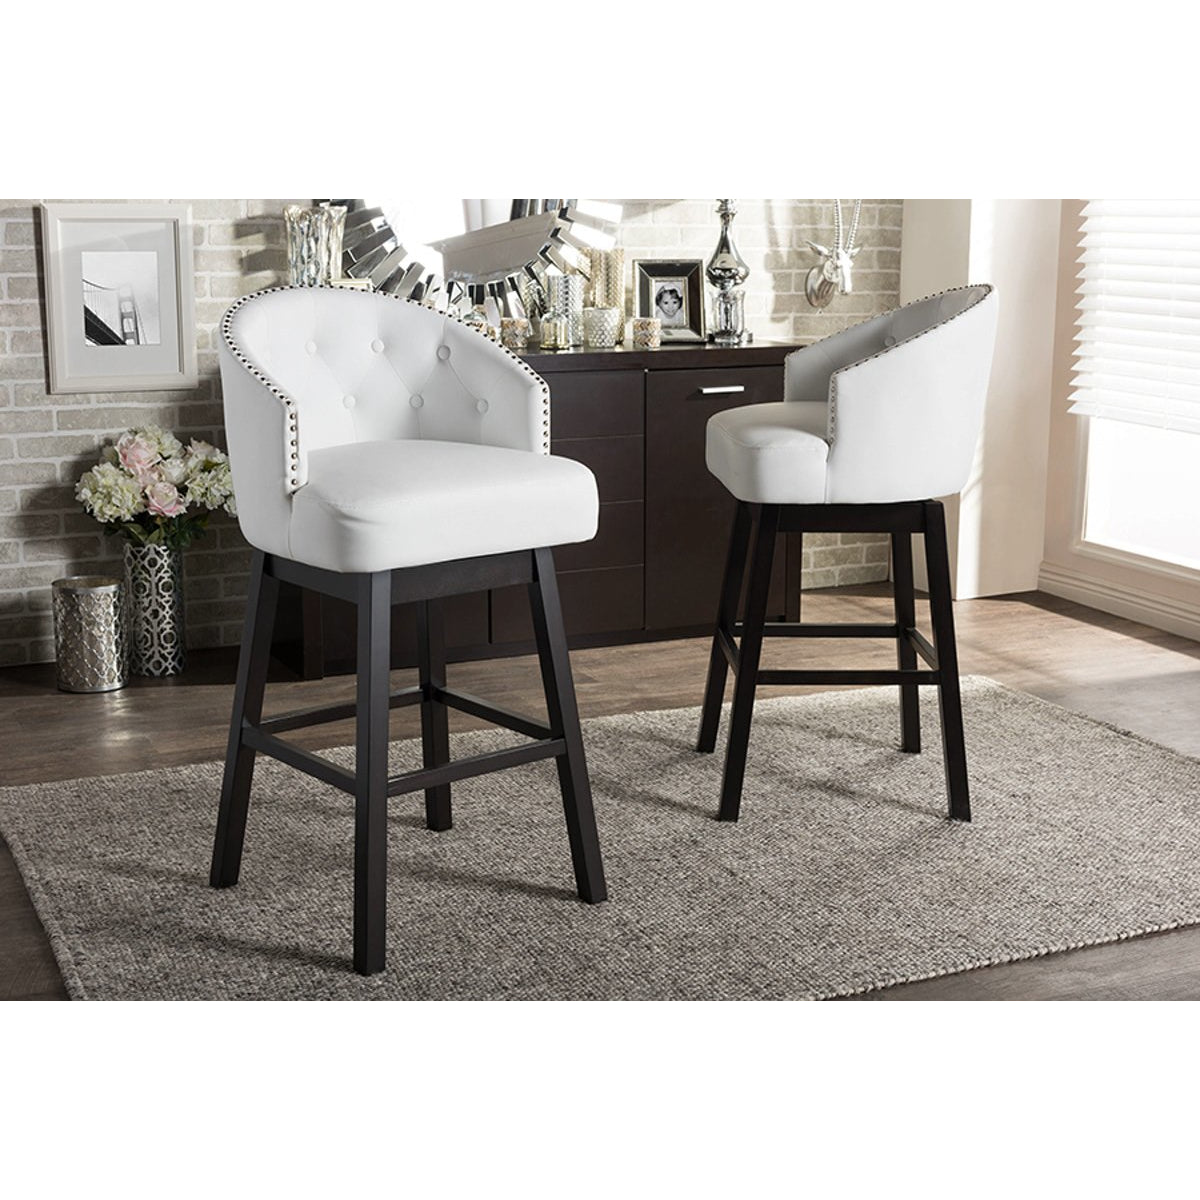 Baxton Studio Avril Modern and Contemporary White Faux Leather Tufted Swivel Barstool with Nail heads Trim (Set of 2) Baxton Studio-Bar Stools-Minimal And Modern - 4